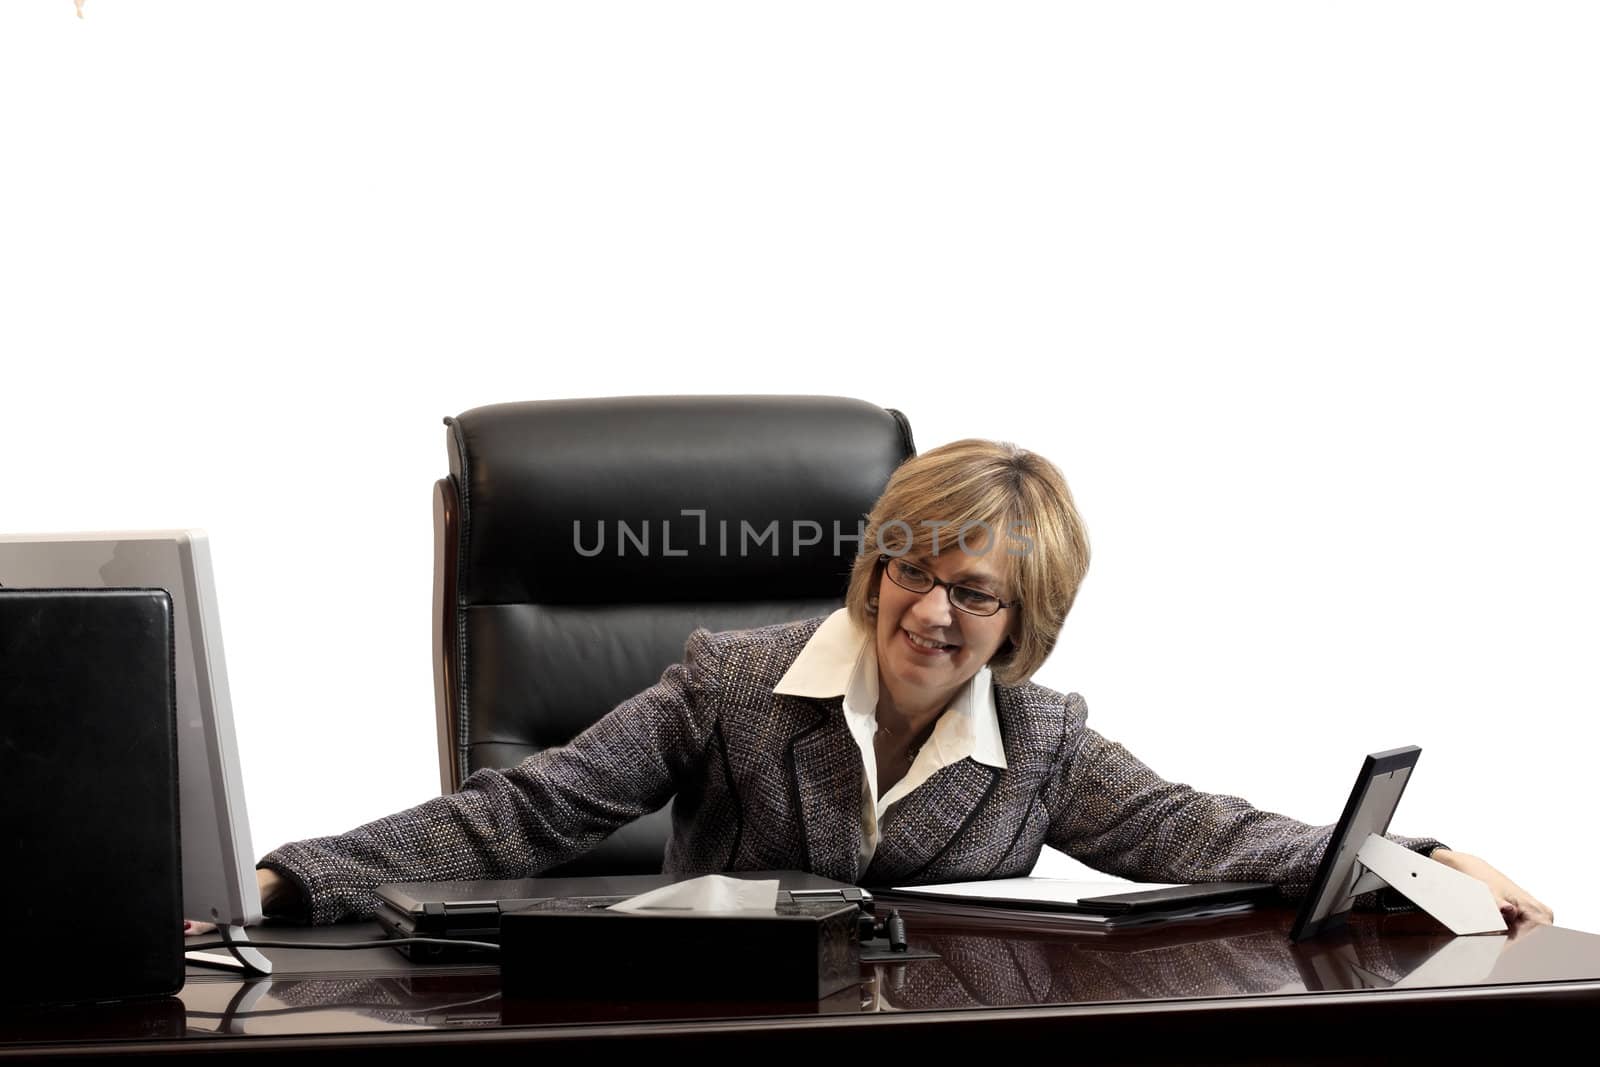 Woman executive showing her feeling of success in getting a new position in her new office